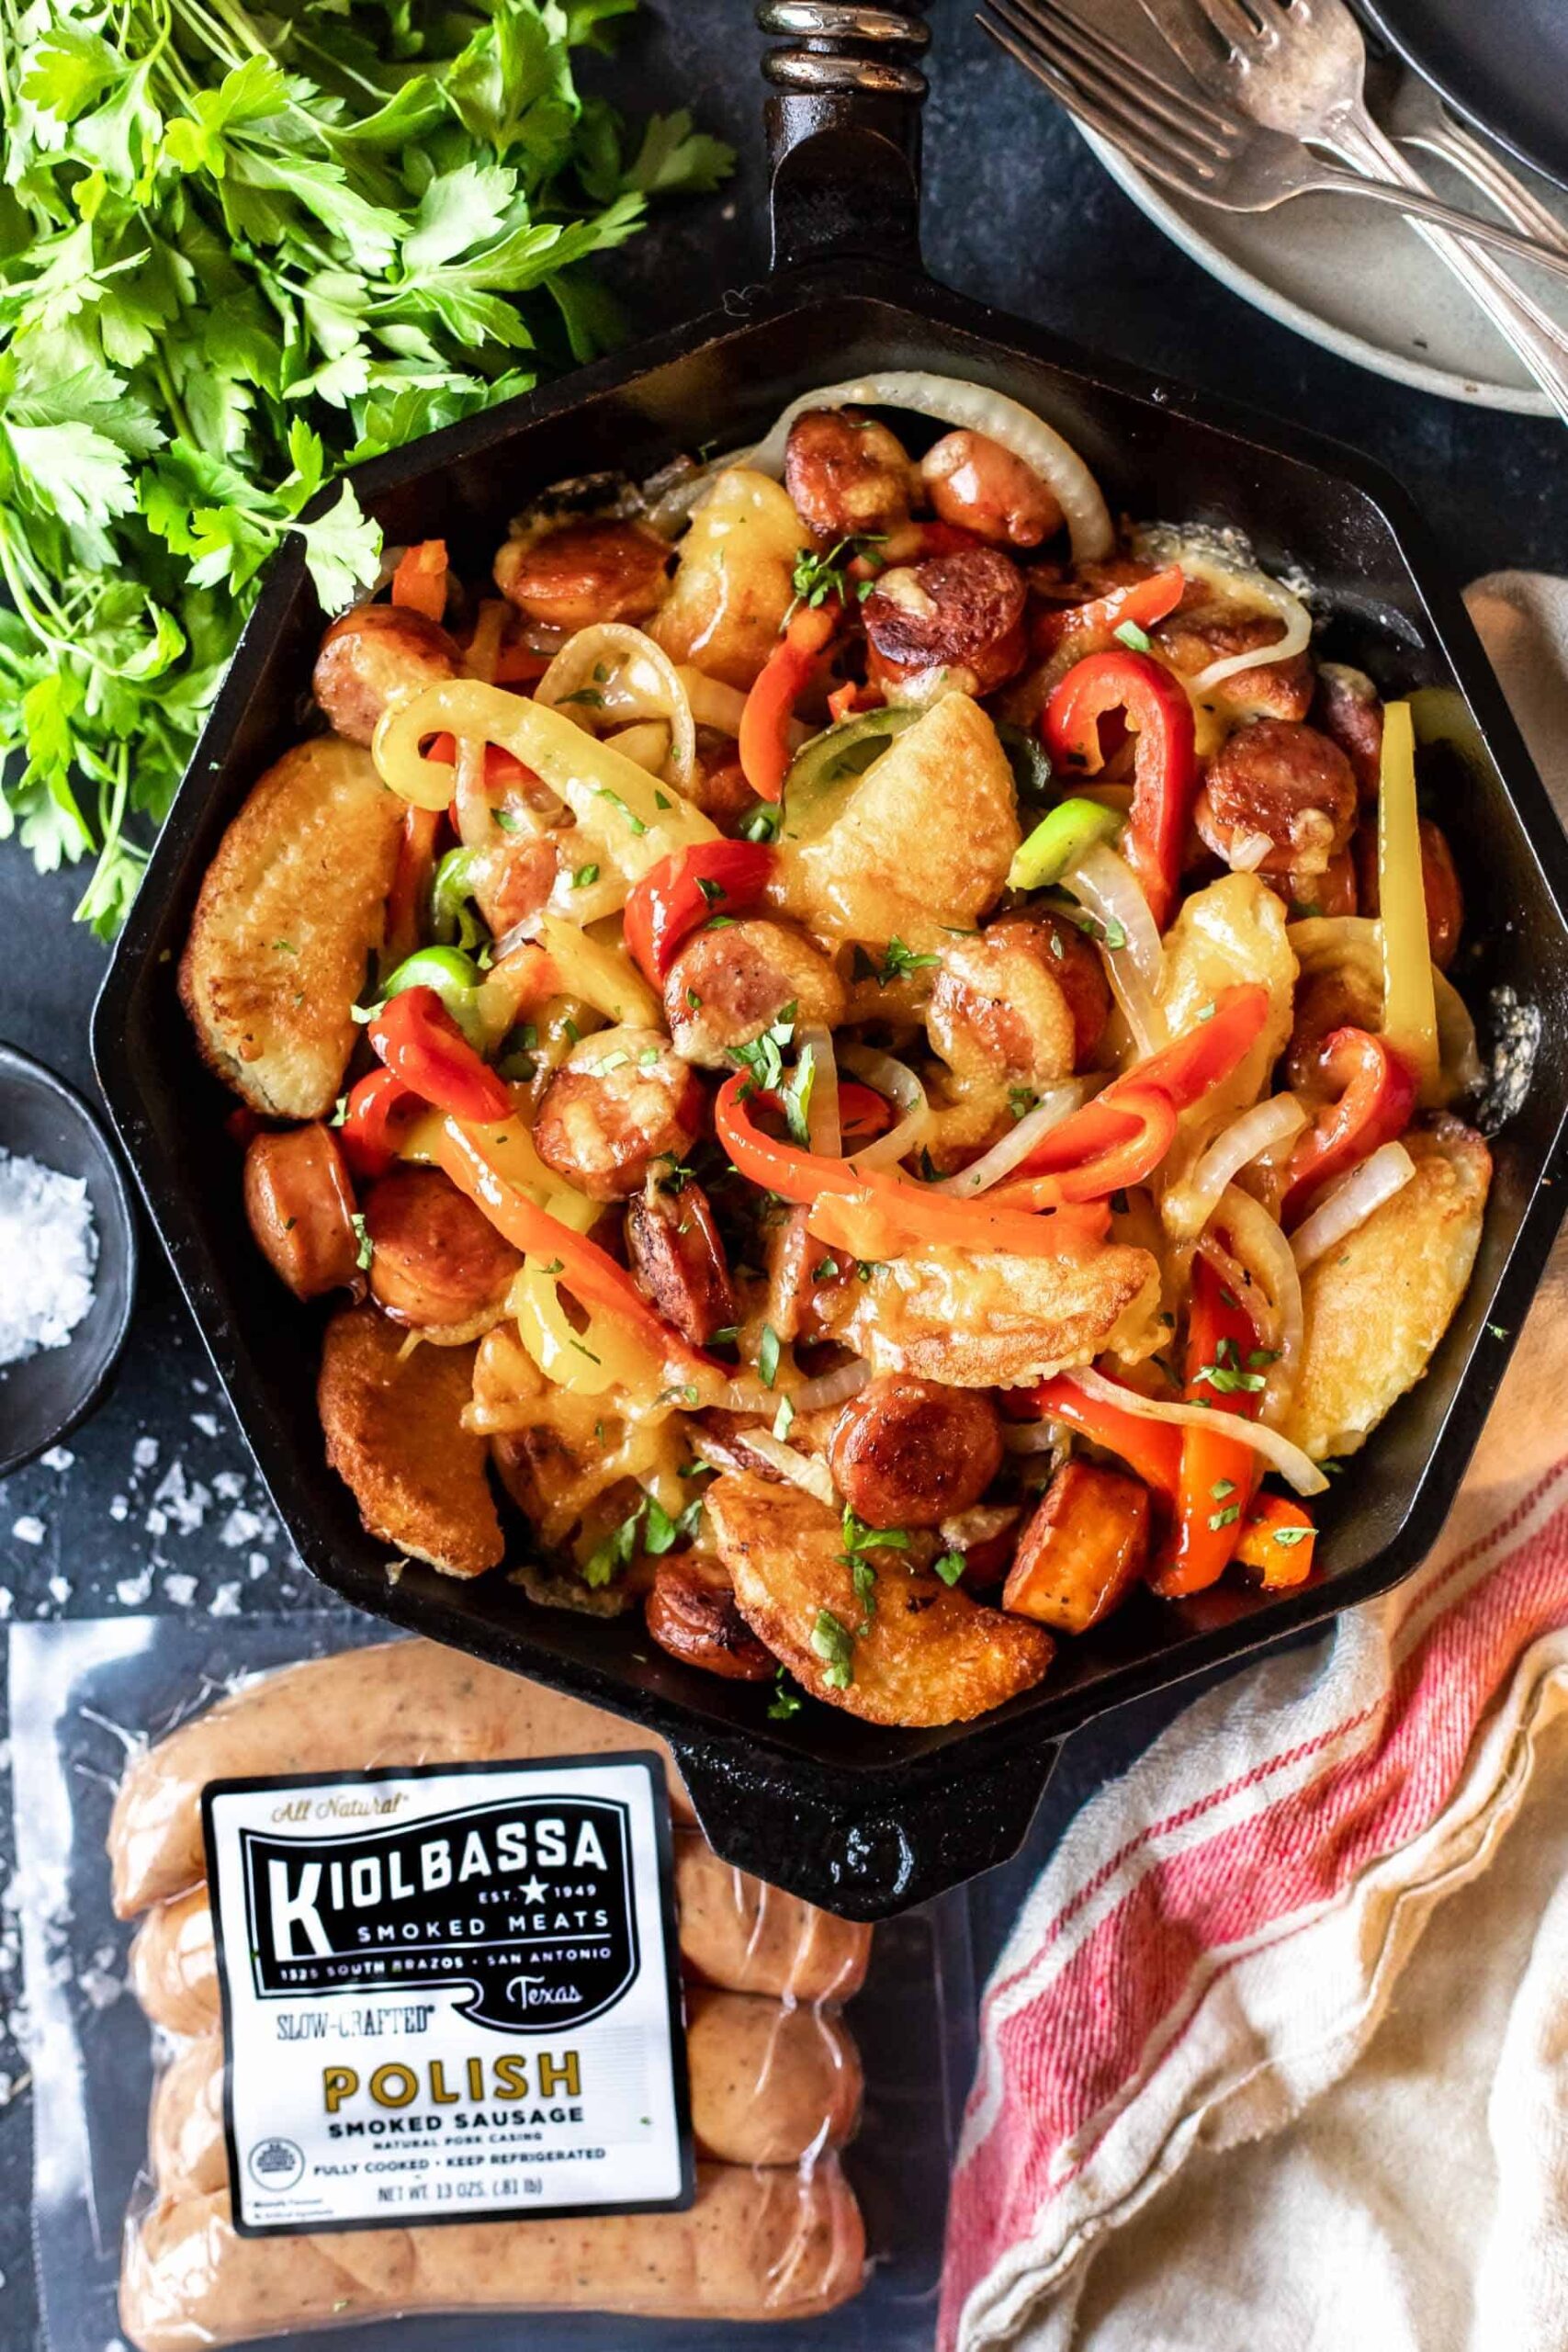 Cast Iron Skillet filled with cooked peppers, onions, rounds of sausage and pierogi